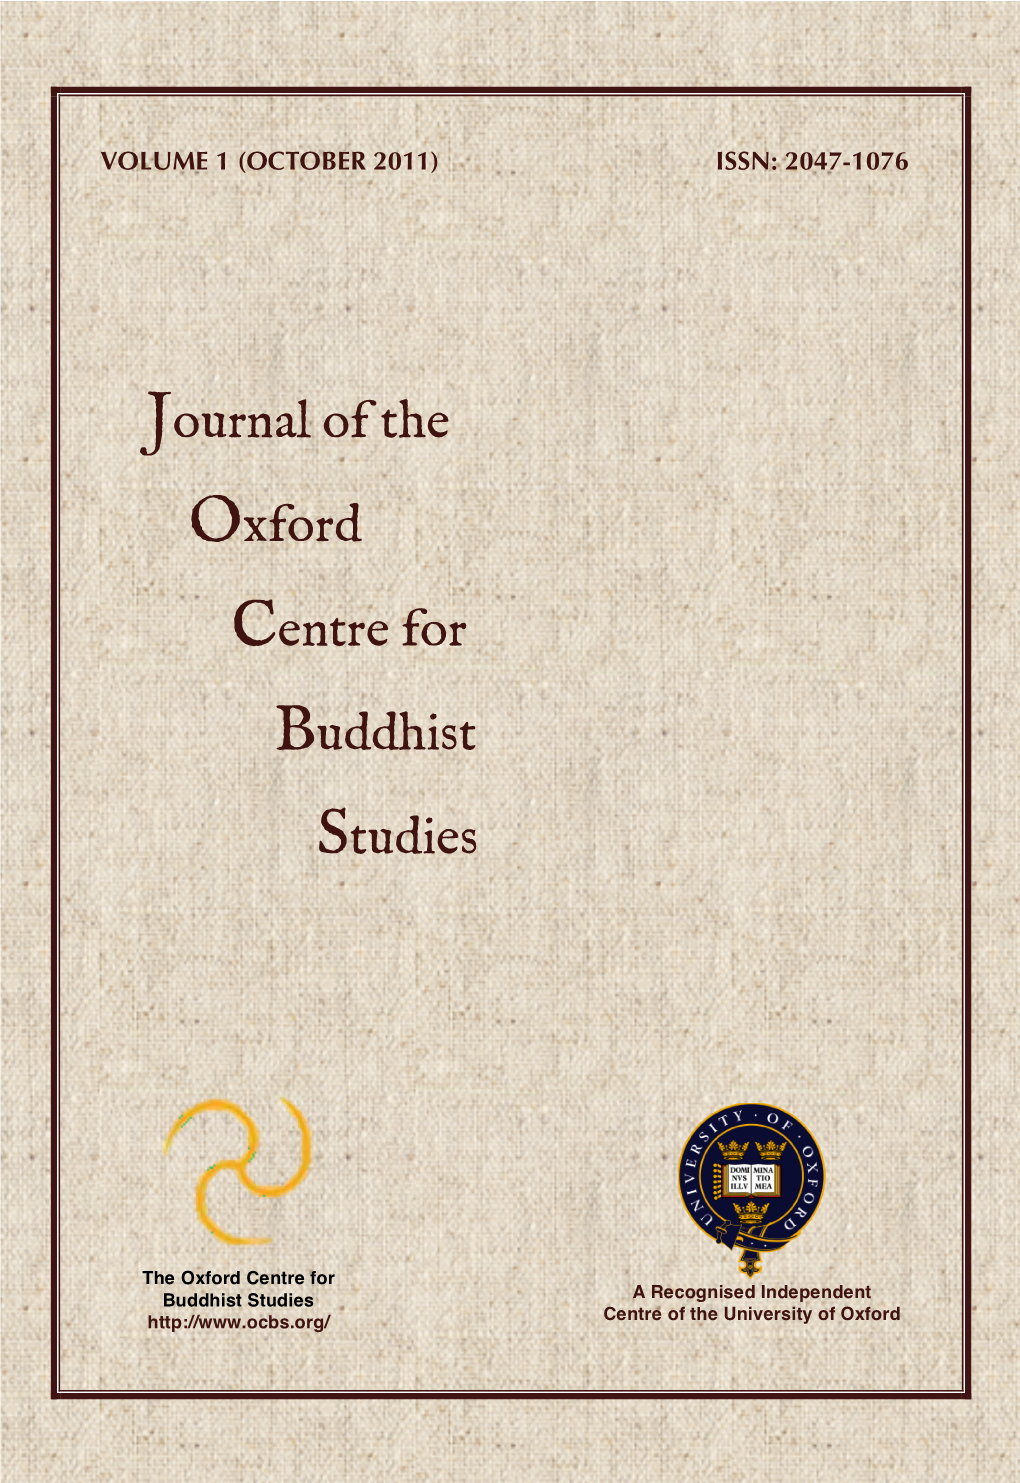 Journal of the Oxford Centre for Buddhist Studies, Vol. 1, October 2011